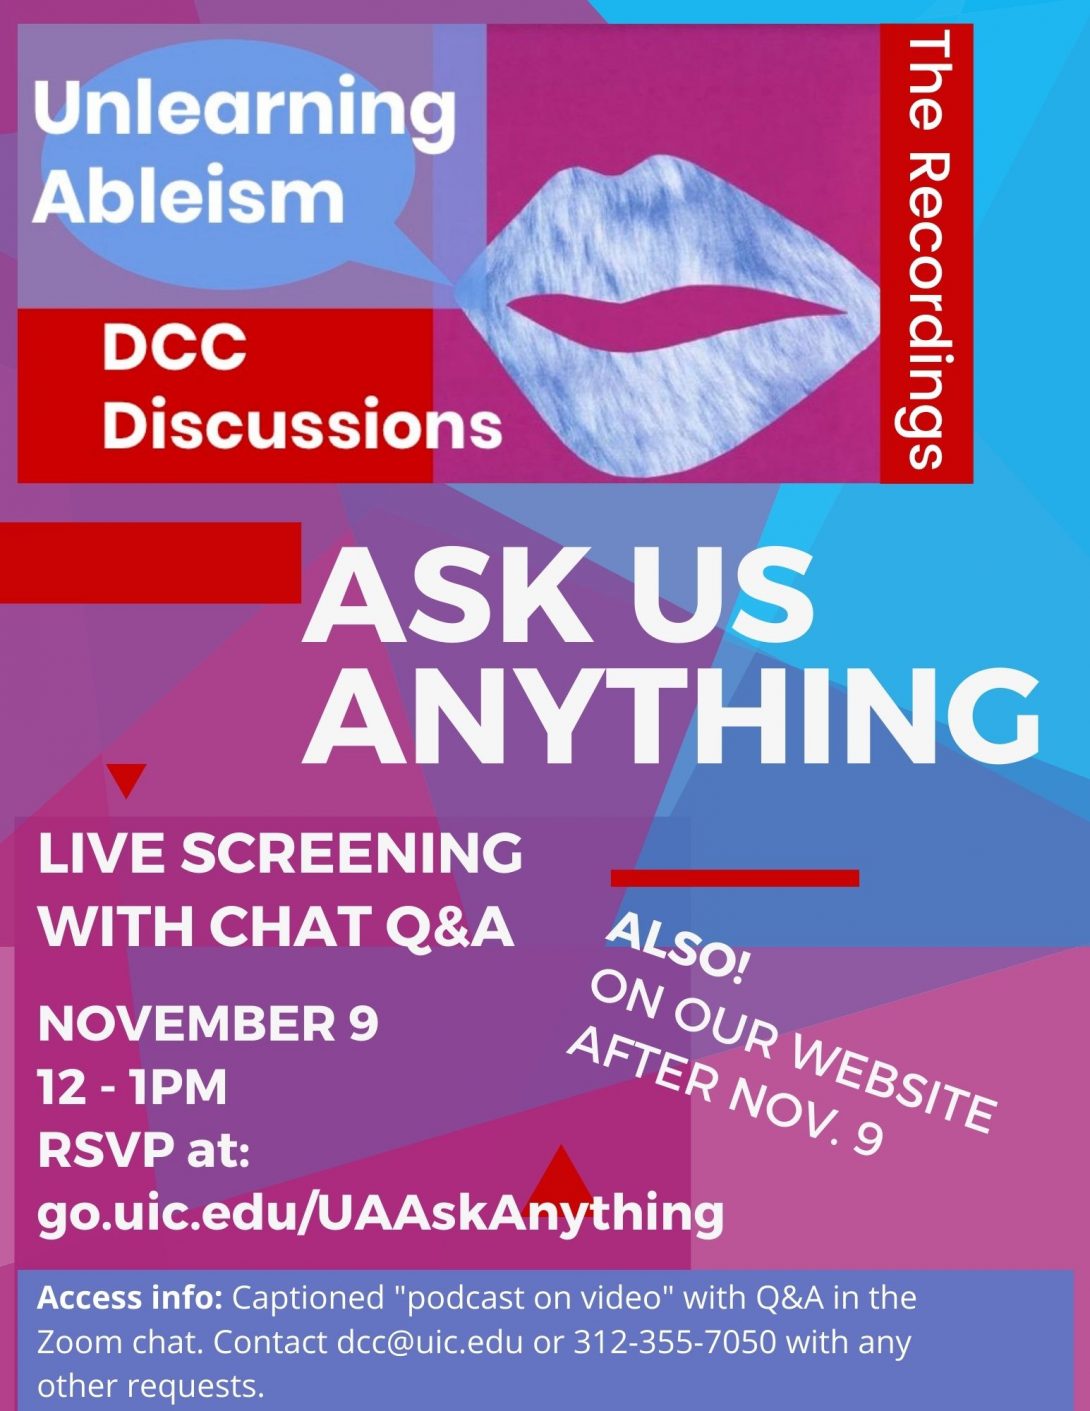 Colorful Flyer for Unlearning Ableism, ID in description